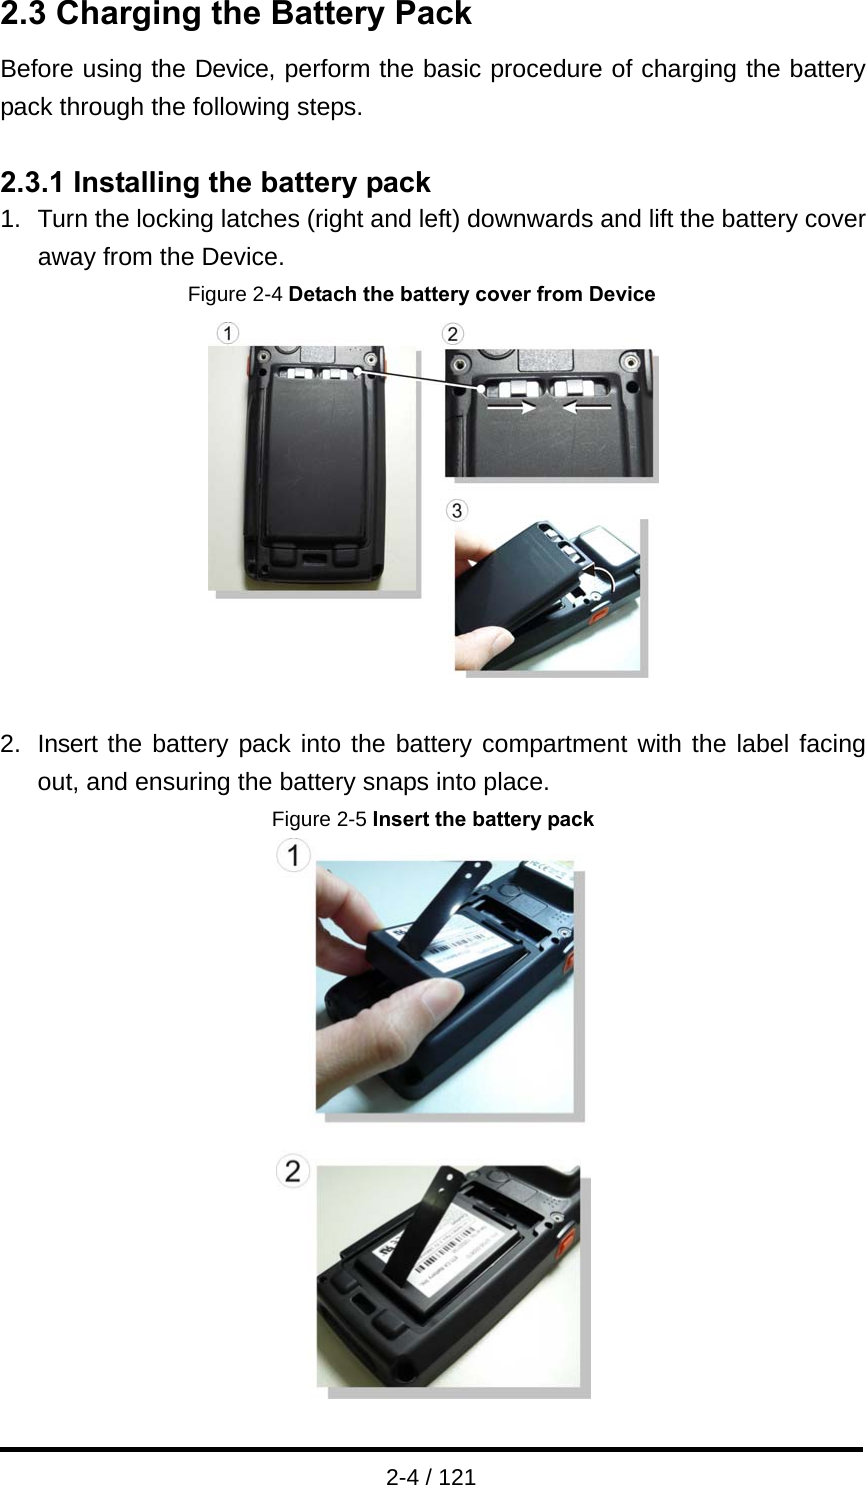  2-4 / 121 2.3 Charging the Battery Pack Before using the Device, perform the basic procedure of charging the battery pack through the following steps.  2.3.1 Installing the battery pack 1.  Turn the locking latches (right and left) downwards and lift the battery cover away from the Device. Figure 2-4 Detach the battery cover from Device   2.  Insert the battery pack into the battery compartment with the label facing out, and ensuring the battery snaps into place.   Figure 2-5 Insert the battery pack  